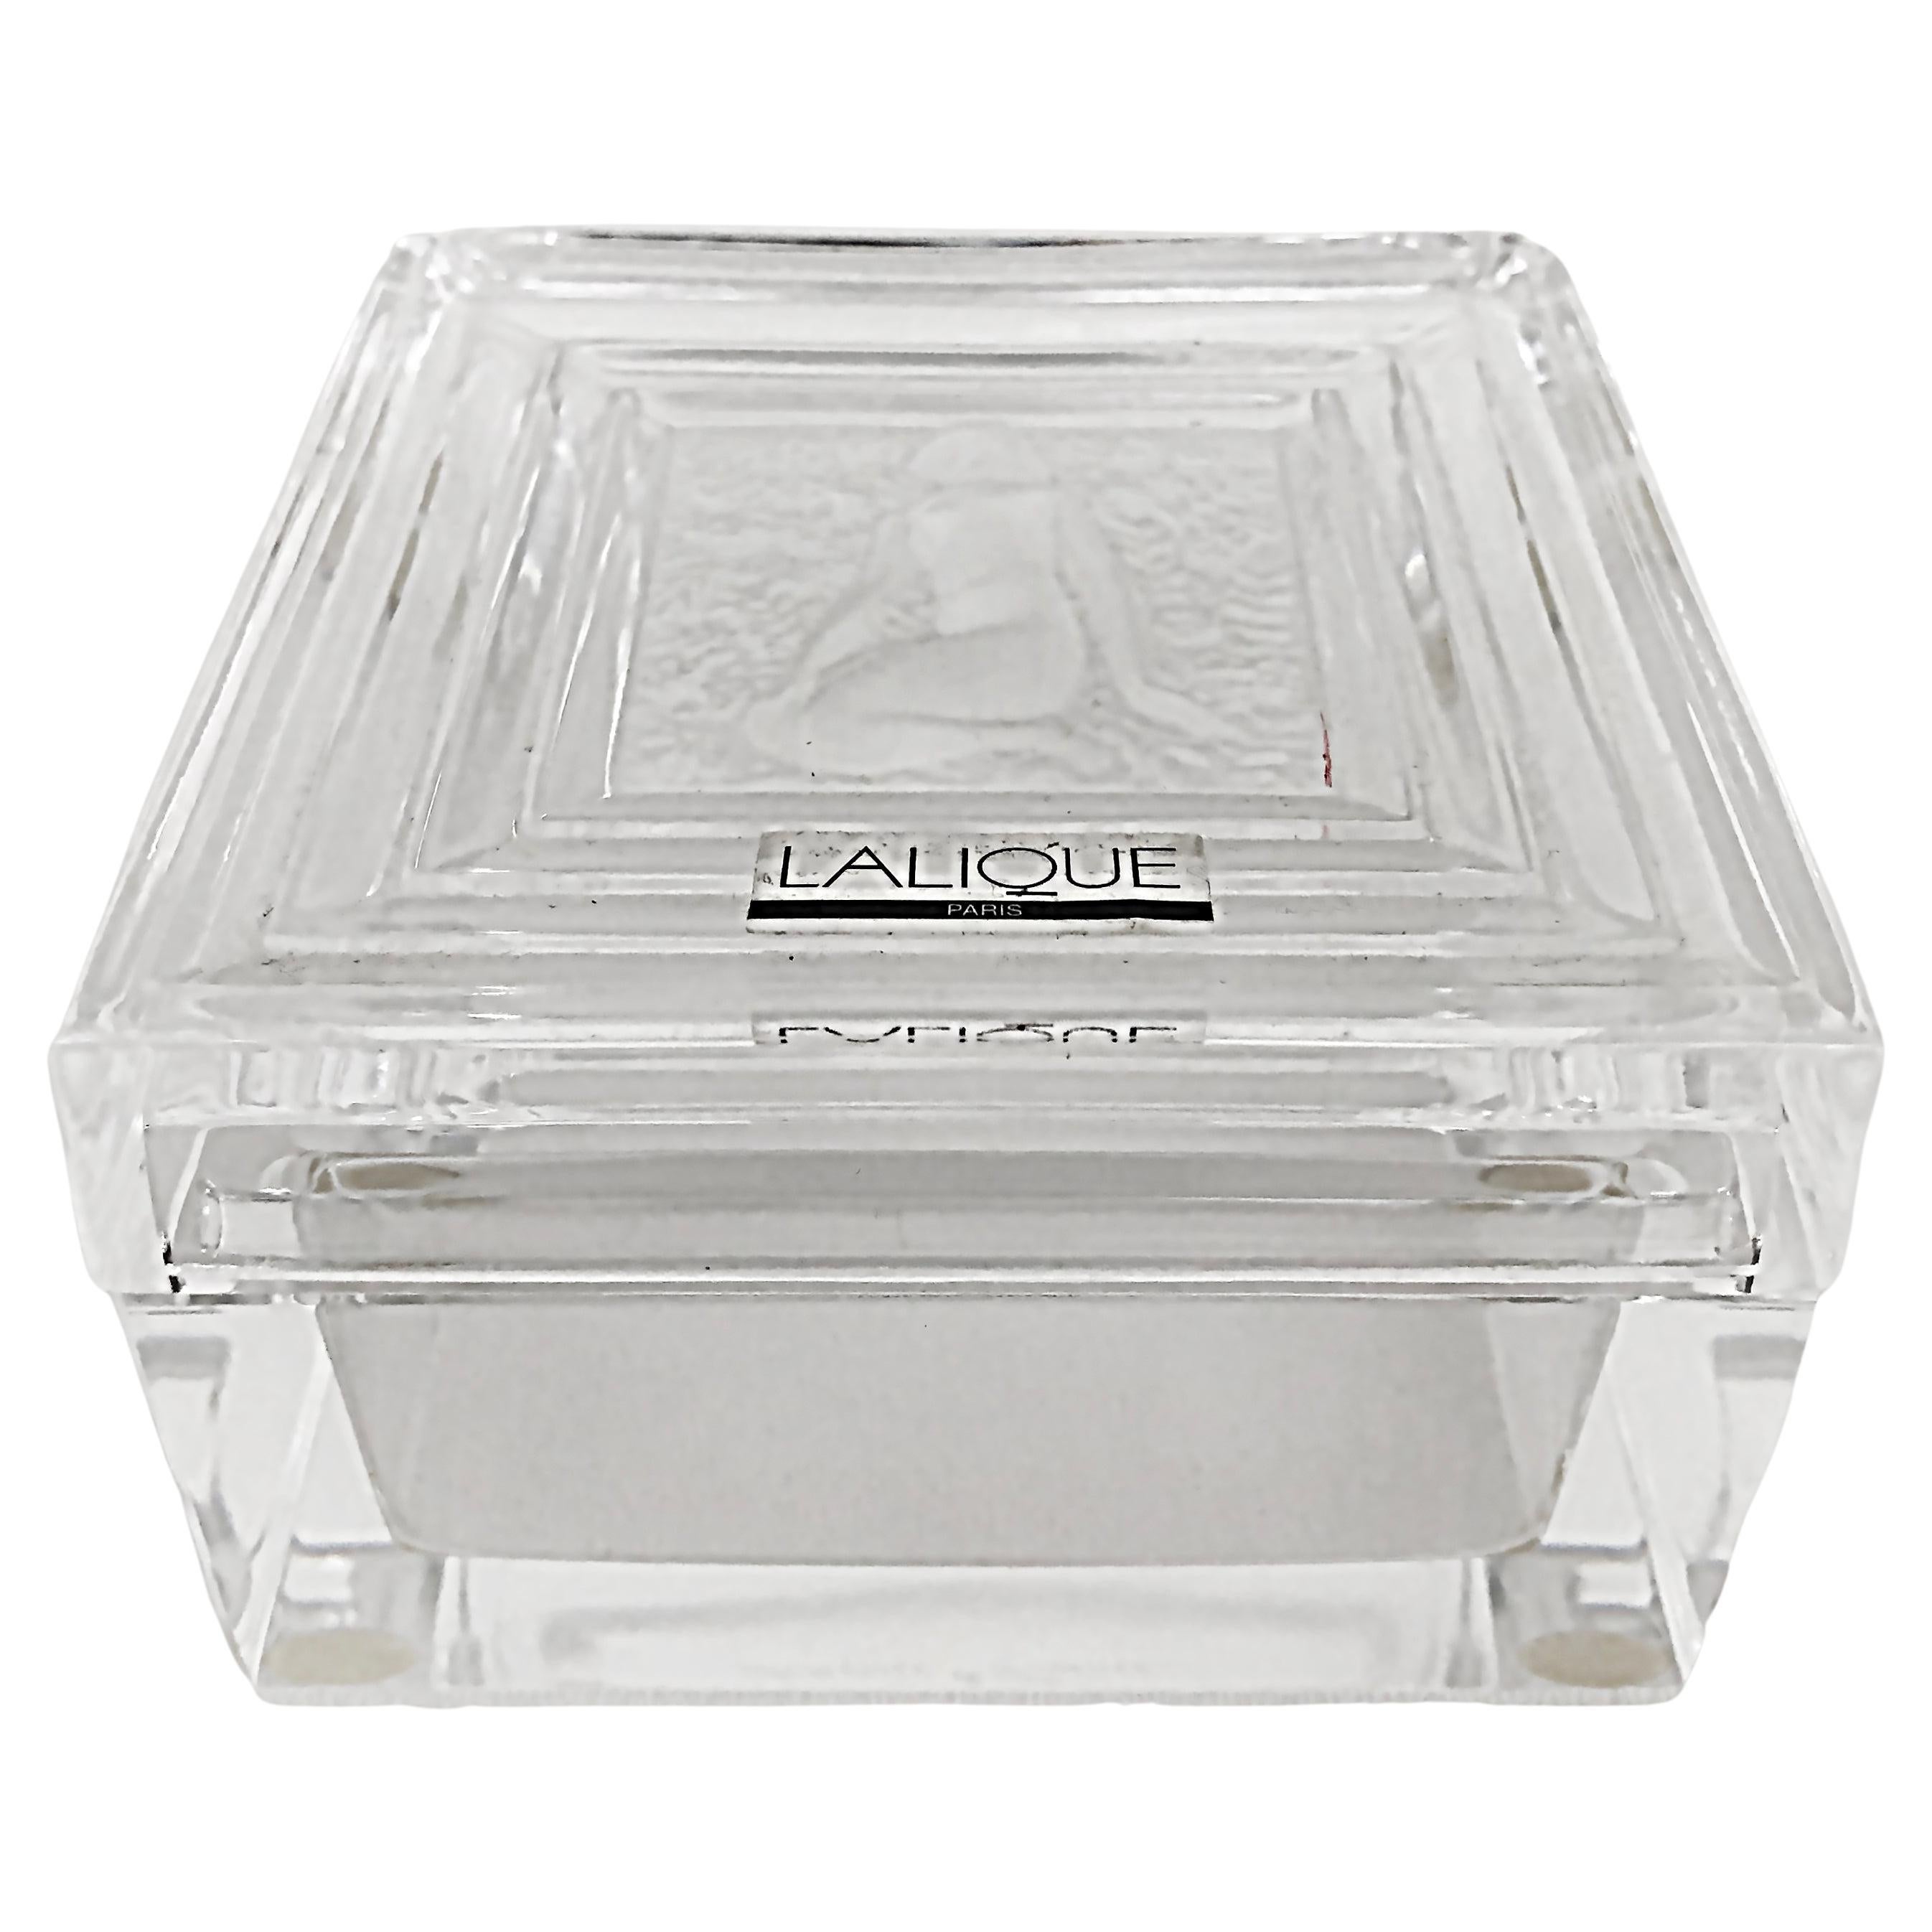 Lalique France Covered Crystal Vanity Box with Etched Lid